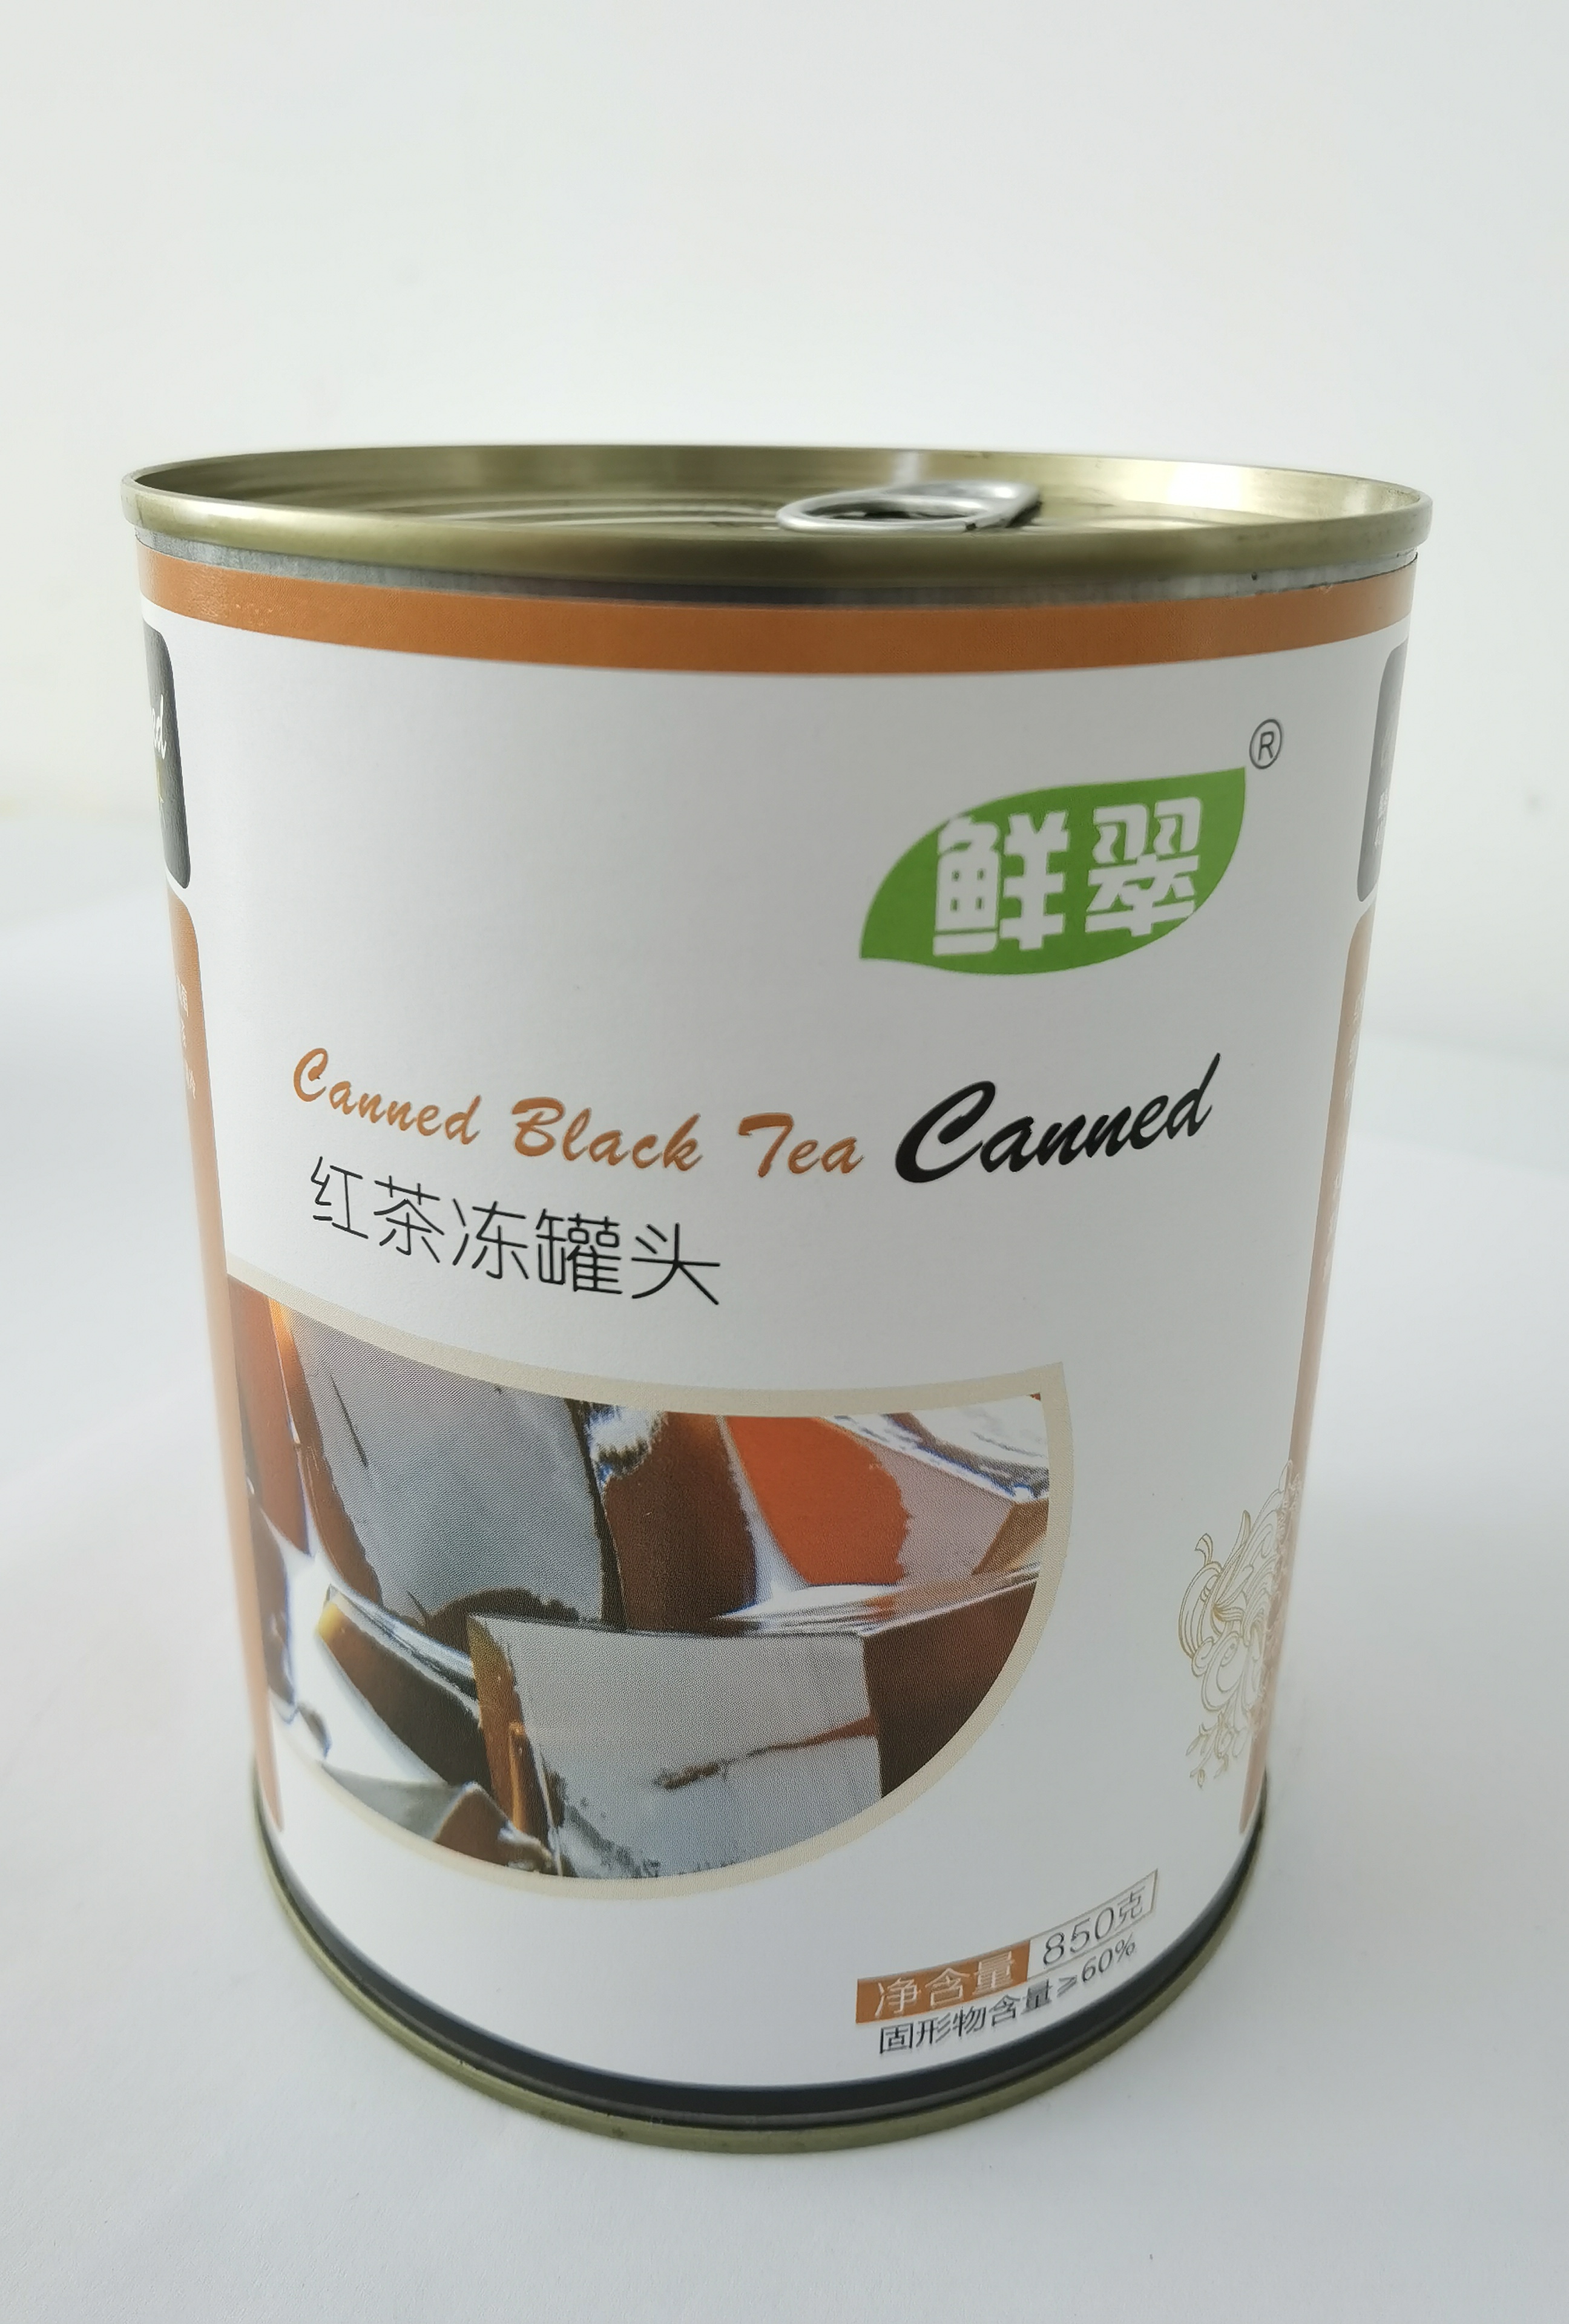 Canned Black Tea Jelly